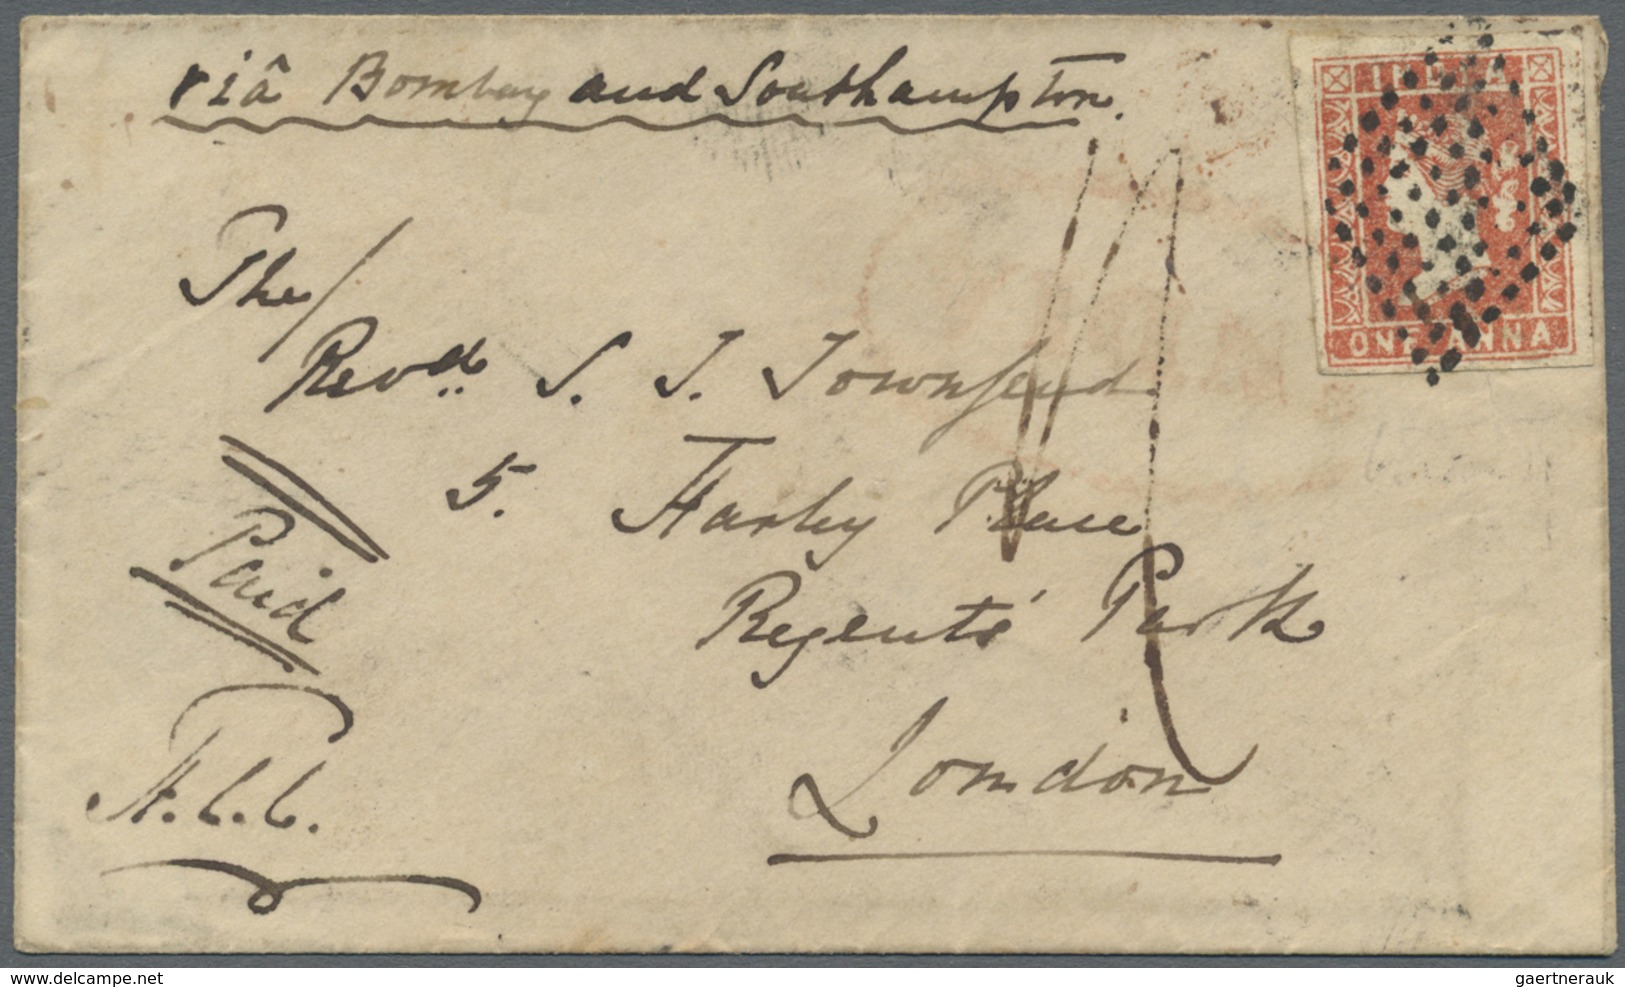 Br Indien: 1854-55: Nine covers franked with lithographed ½a. (six, different dies/shades) and 1a. (two